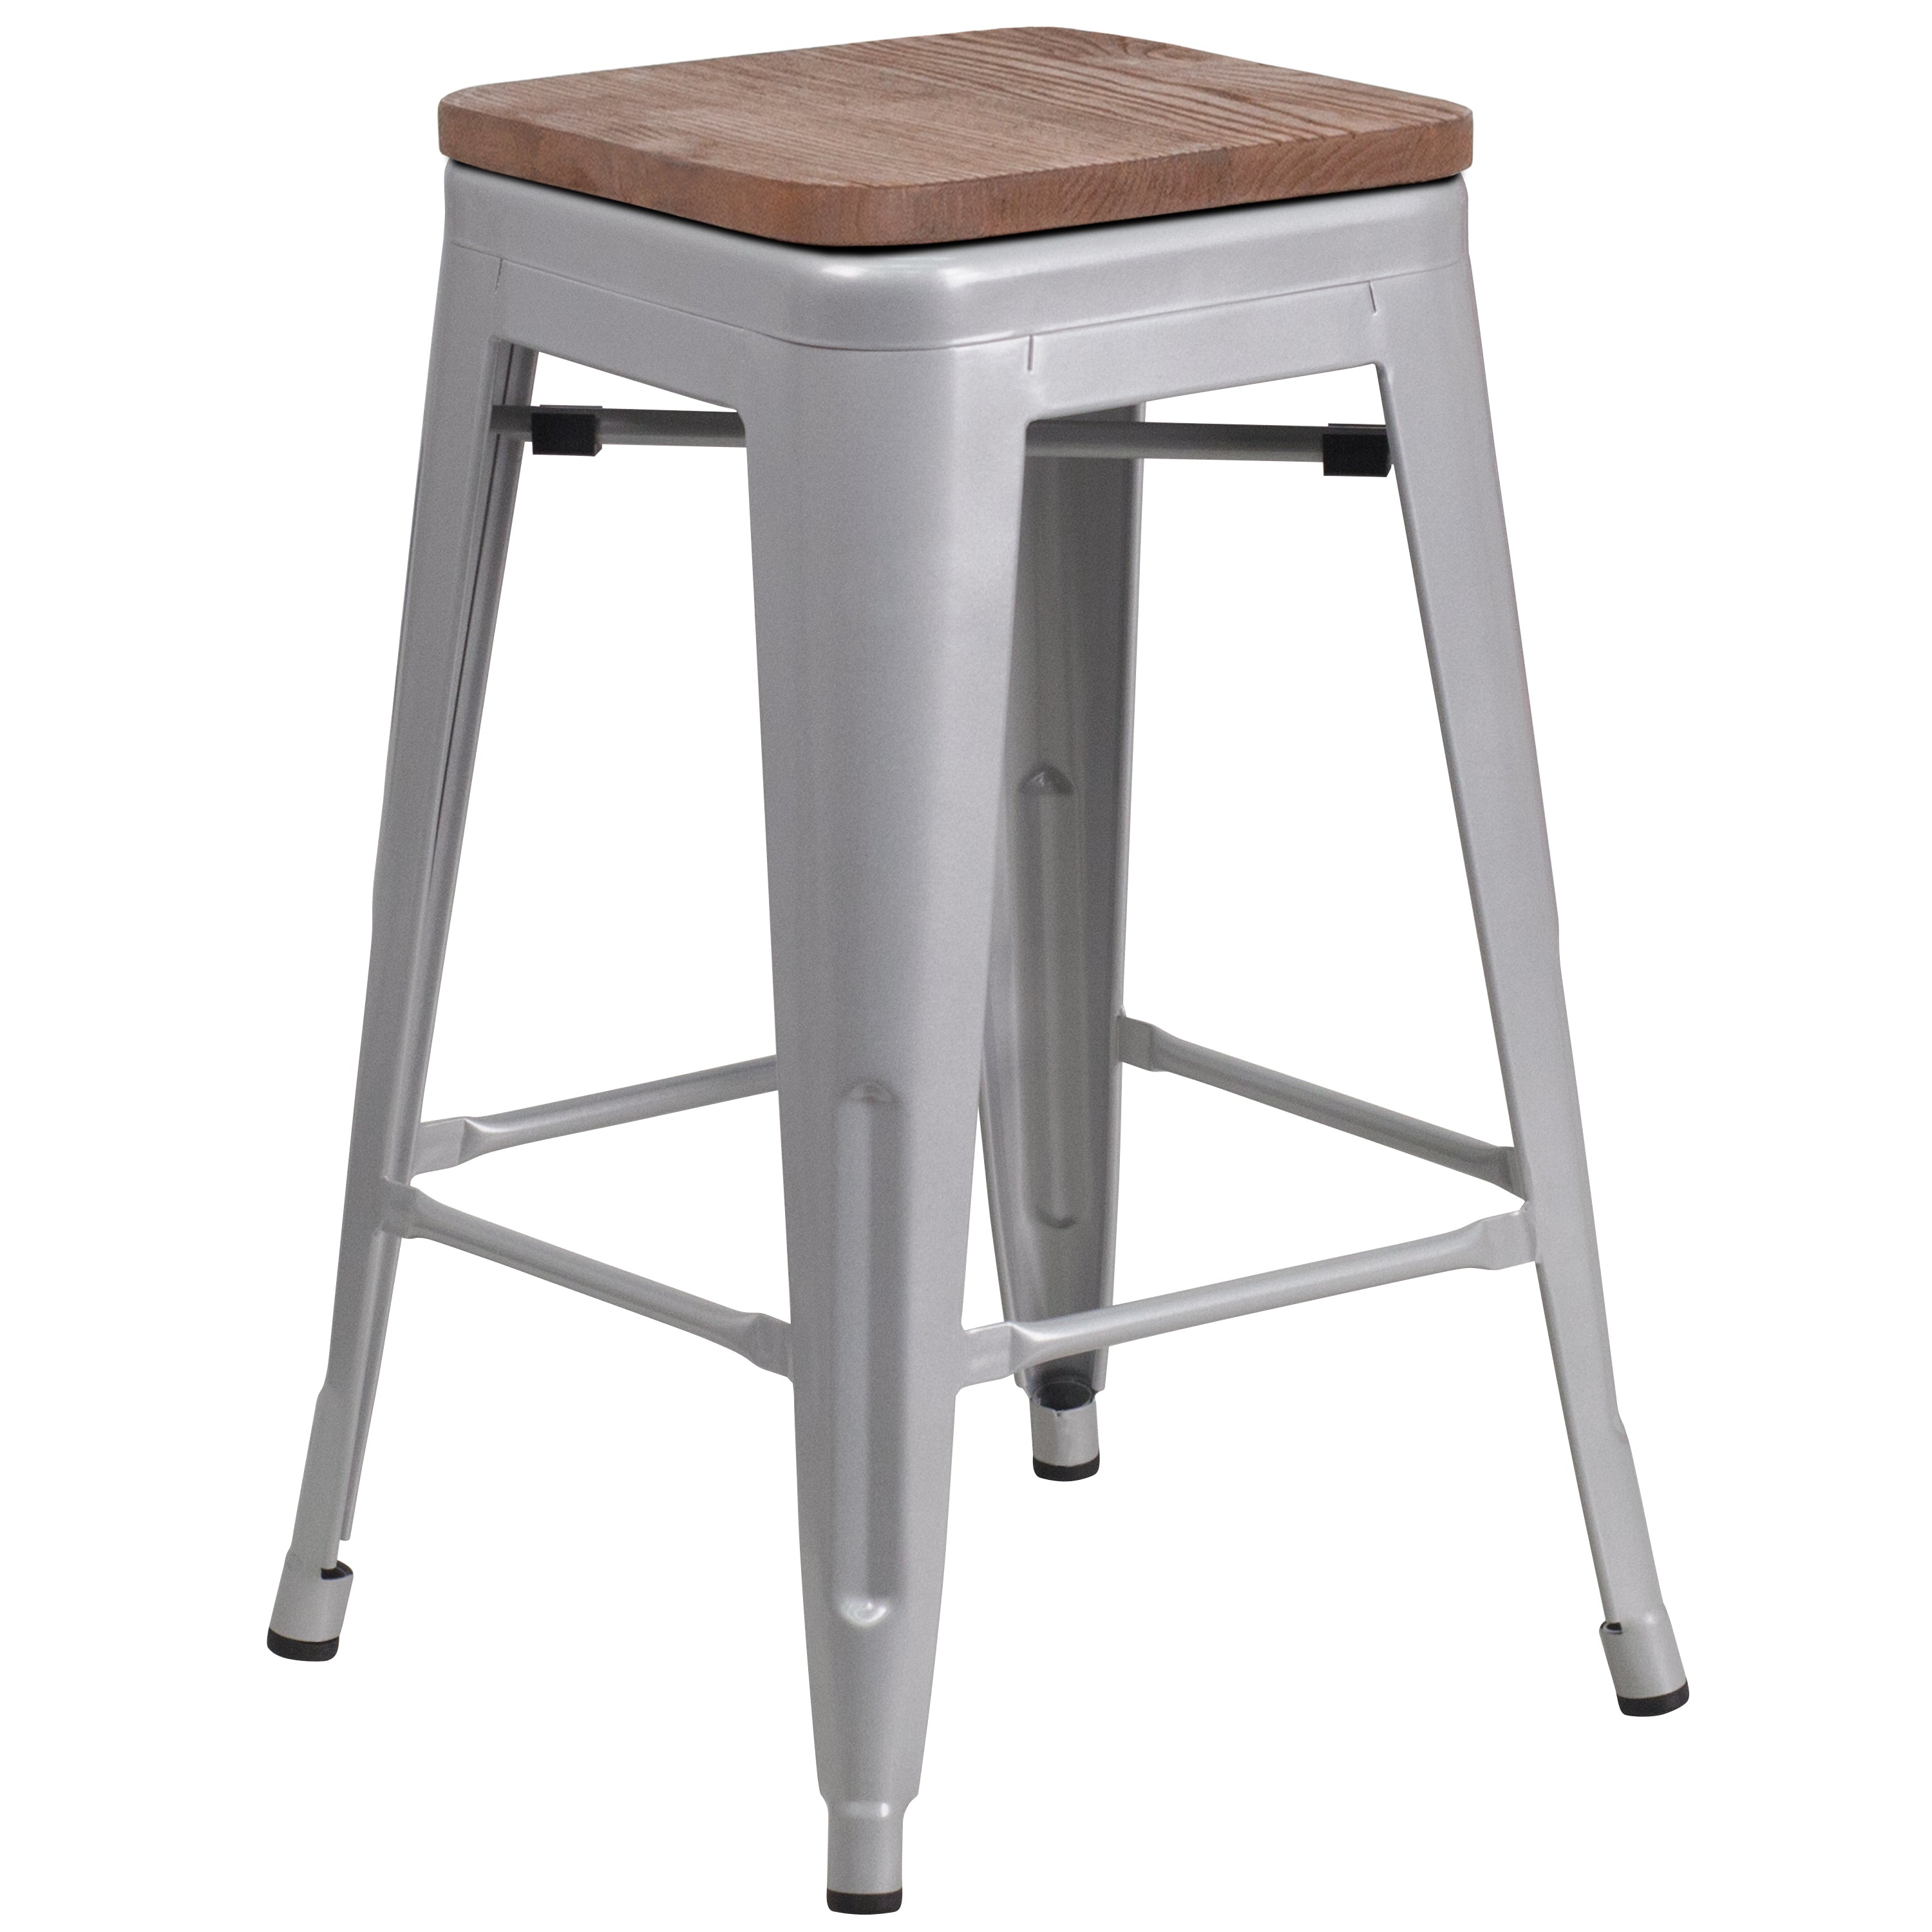 24" High Backless Metal Counter Height Stool with Square Wood Seat-Metal/ Colorful Restaurant Counter Stool-Flash Furniture-Wall2Wall Furnishings